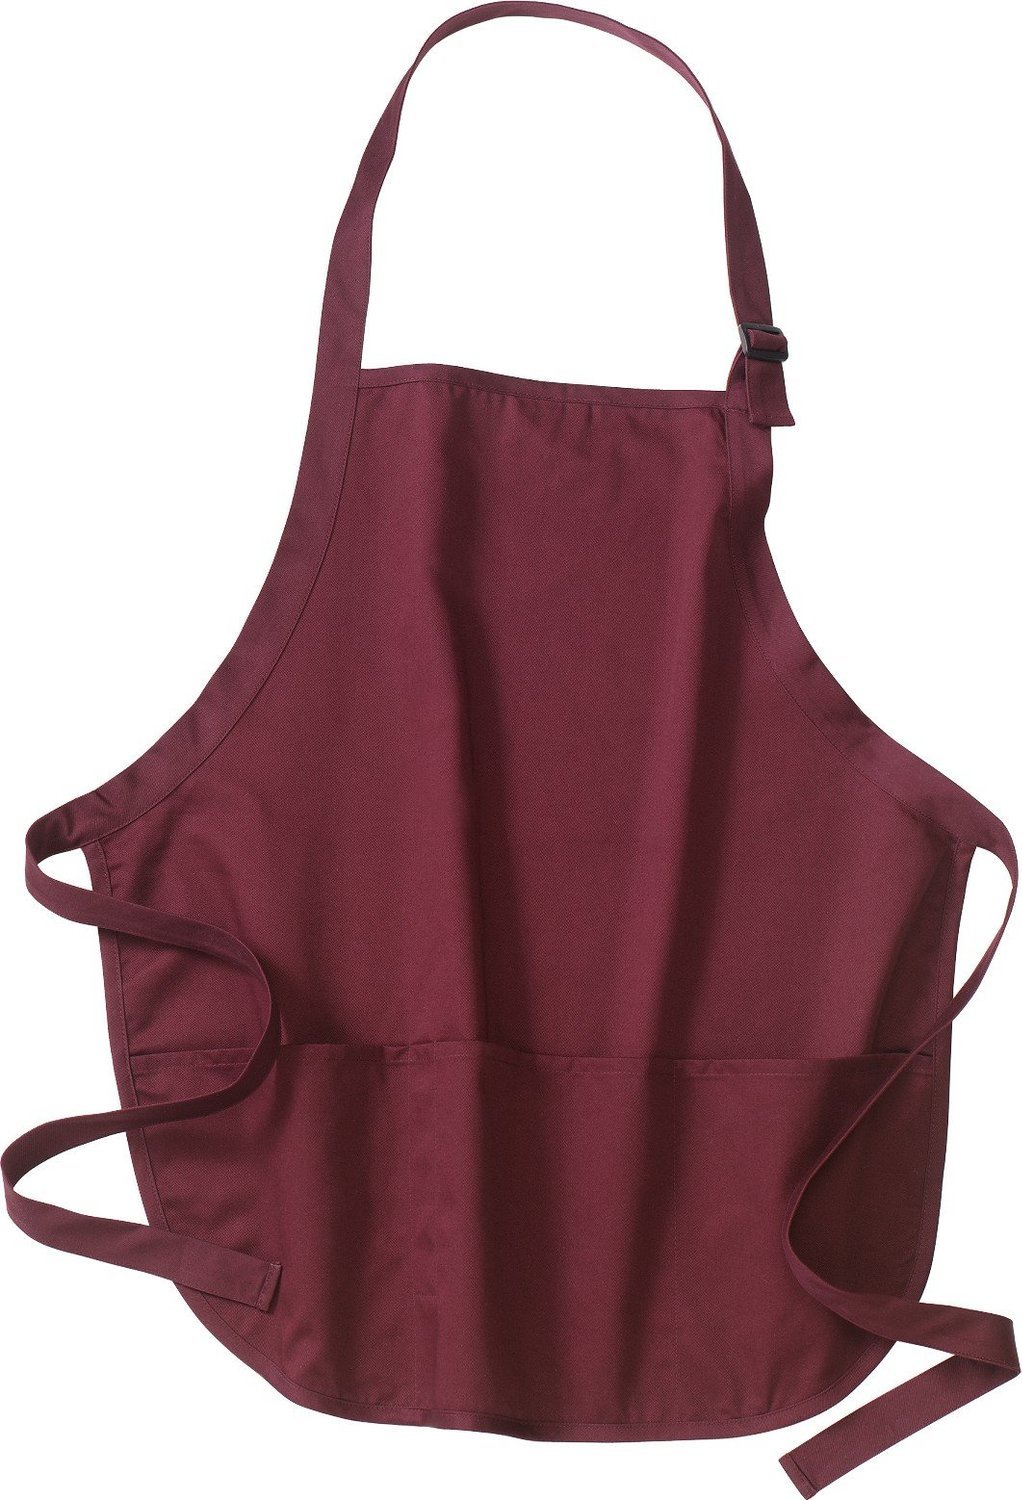 Port Authority - Medium Length Apron with Pouch Pockets. - Maroon A510 OS